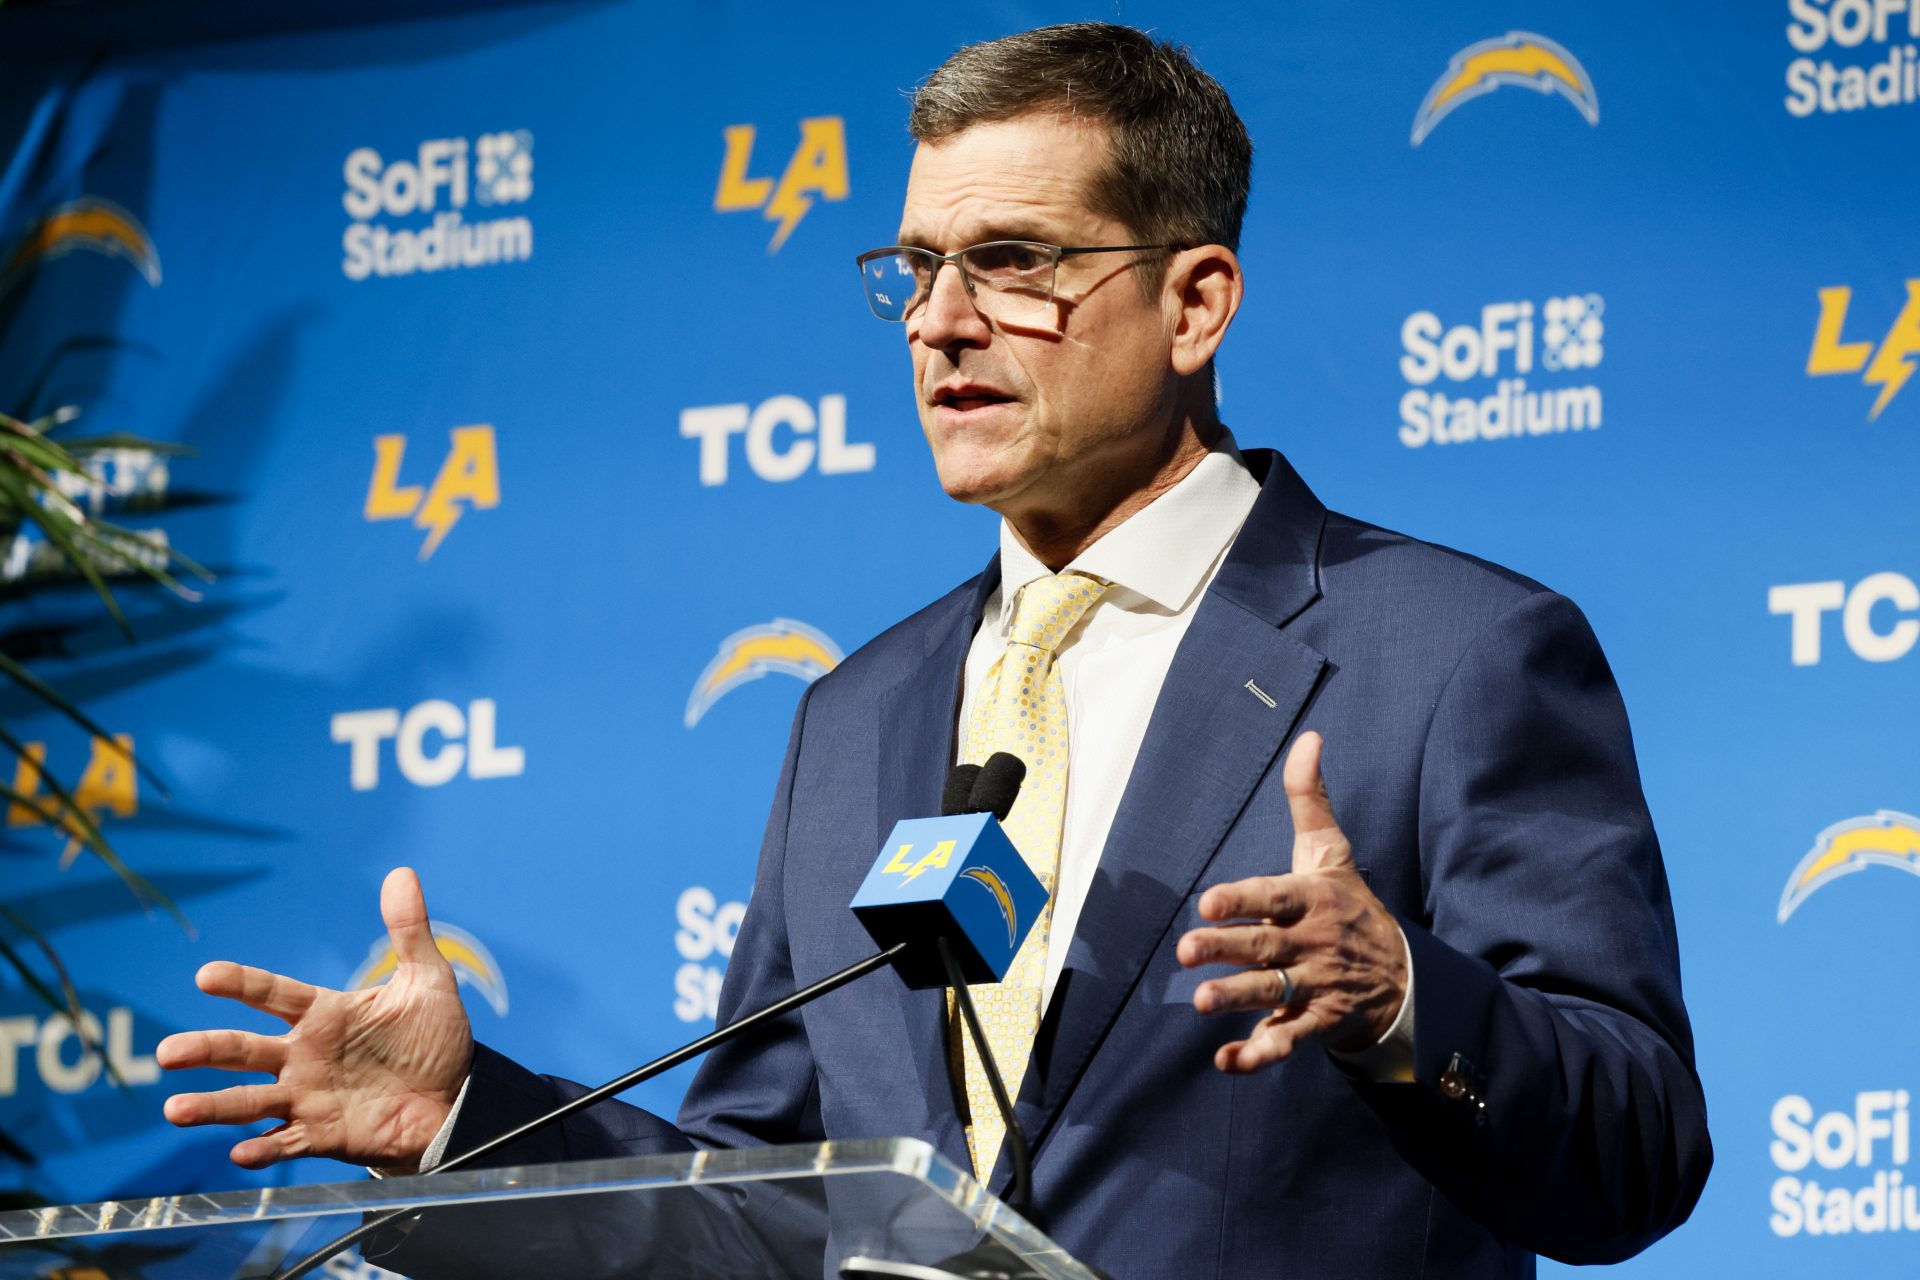 18. Jim Harbaugh, Los Angeles Chargers